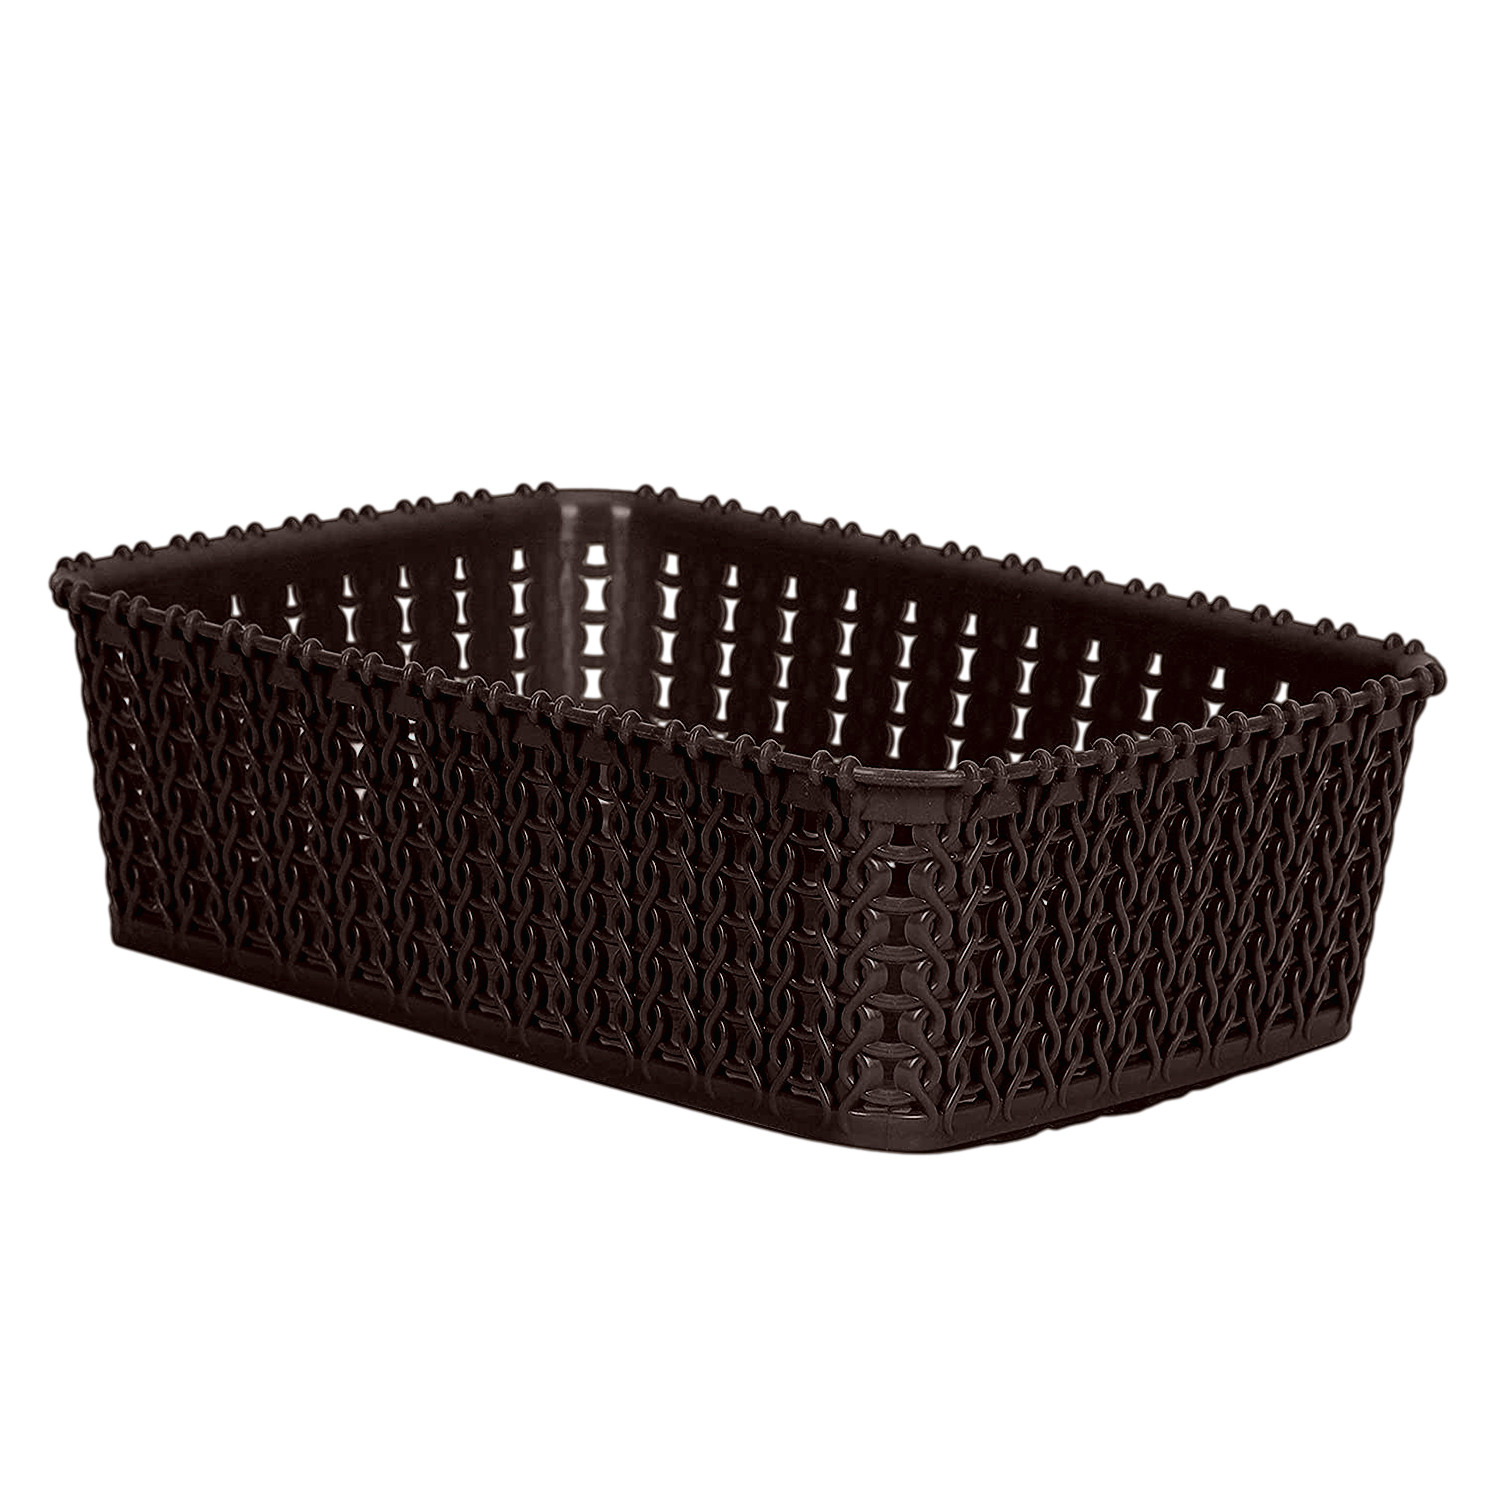 Kuber Industries Multiuses Small M 15 Plastic Tray/Basket/Organizer Without Lid- (Brown) -46KM0111